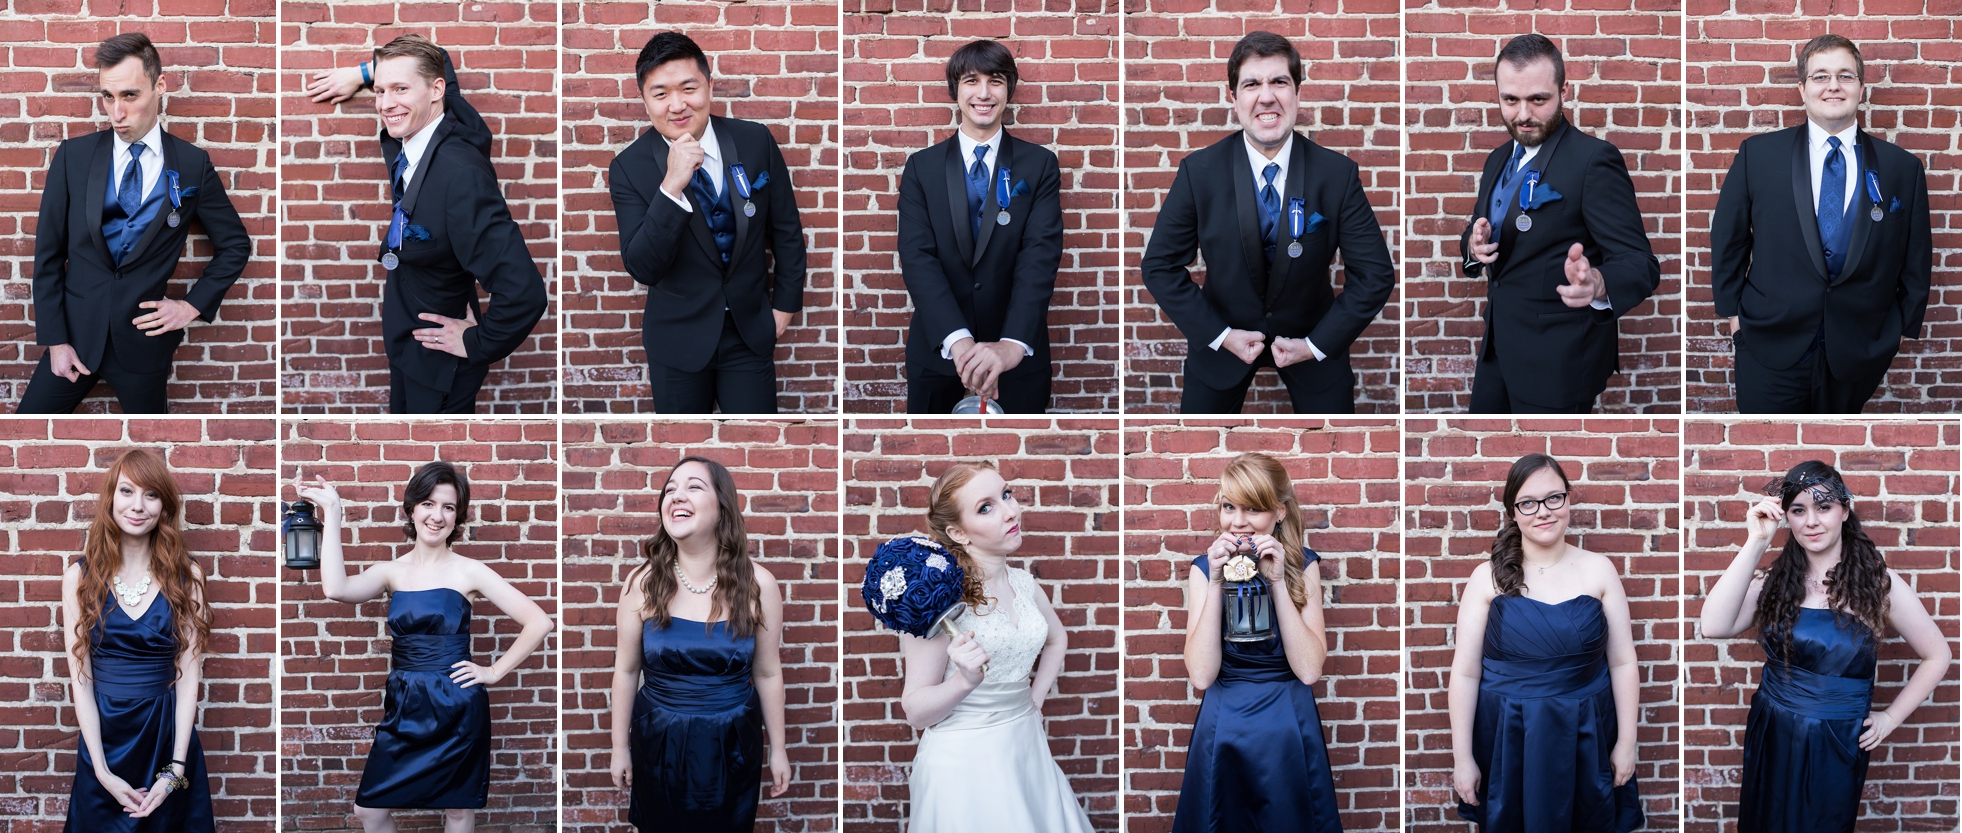 bridal party collage brady bunch